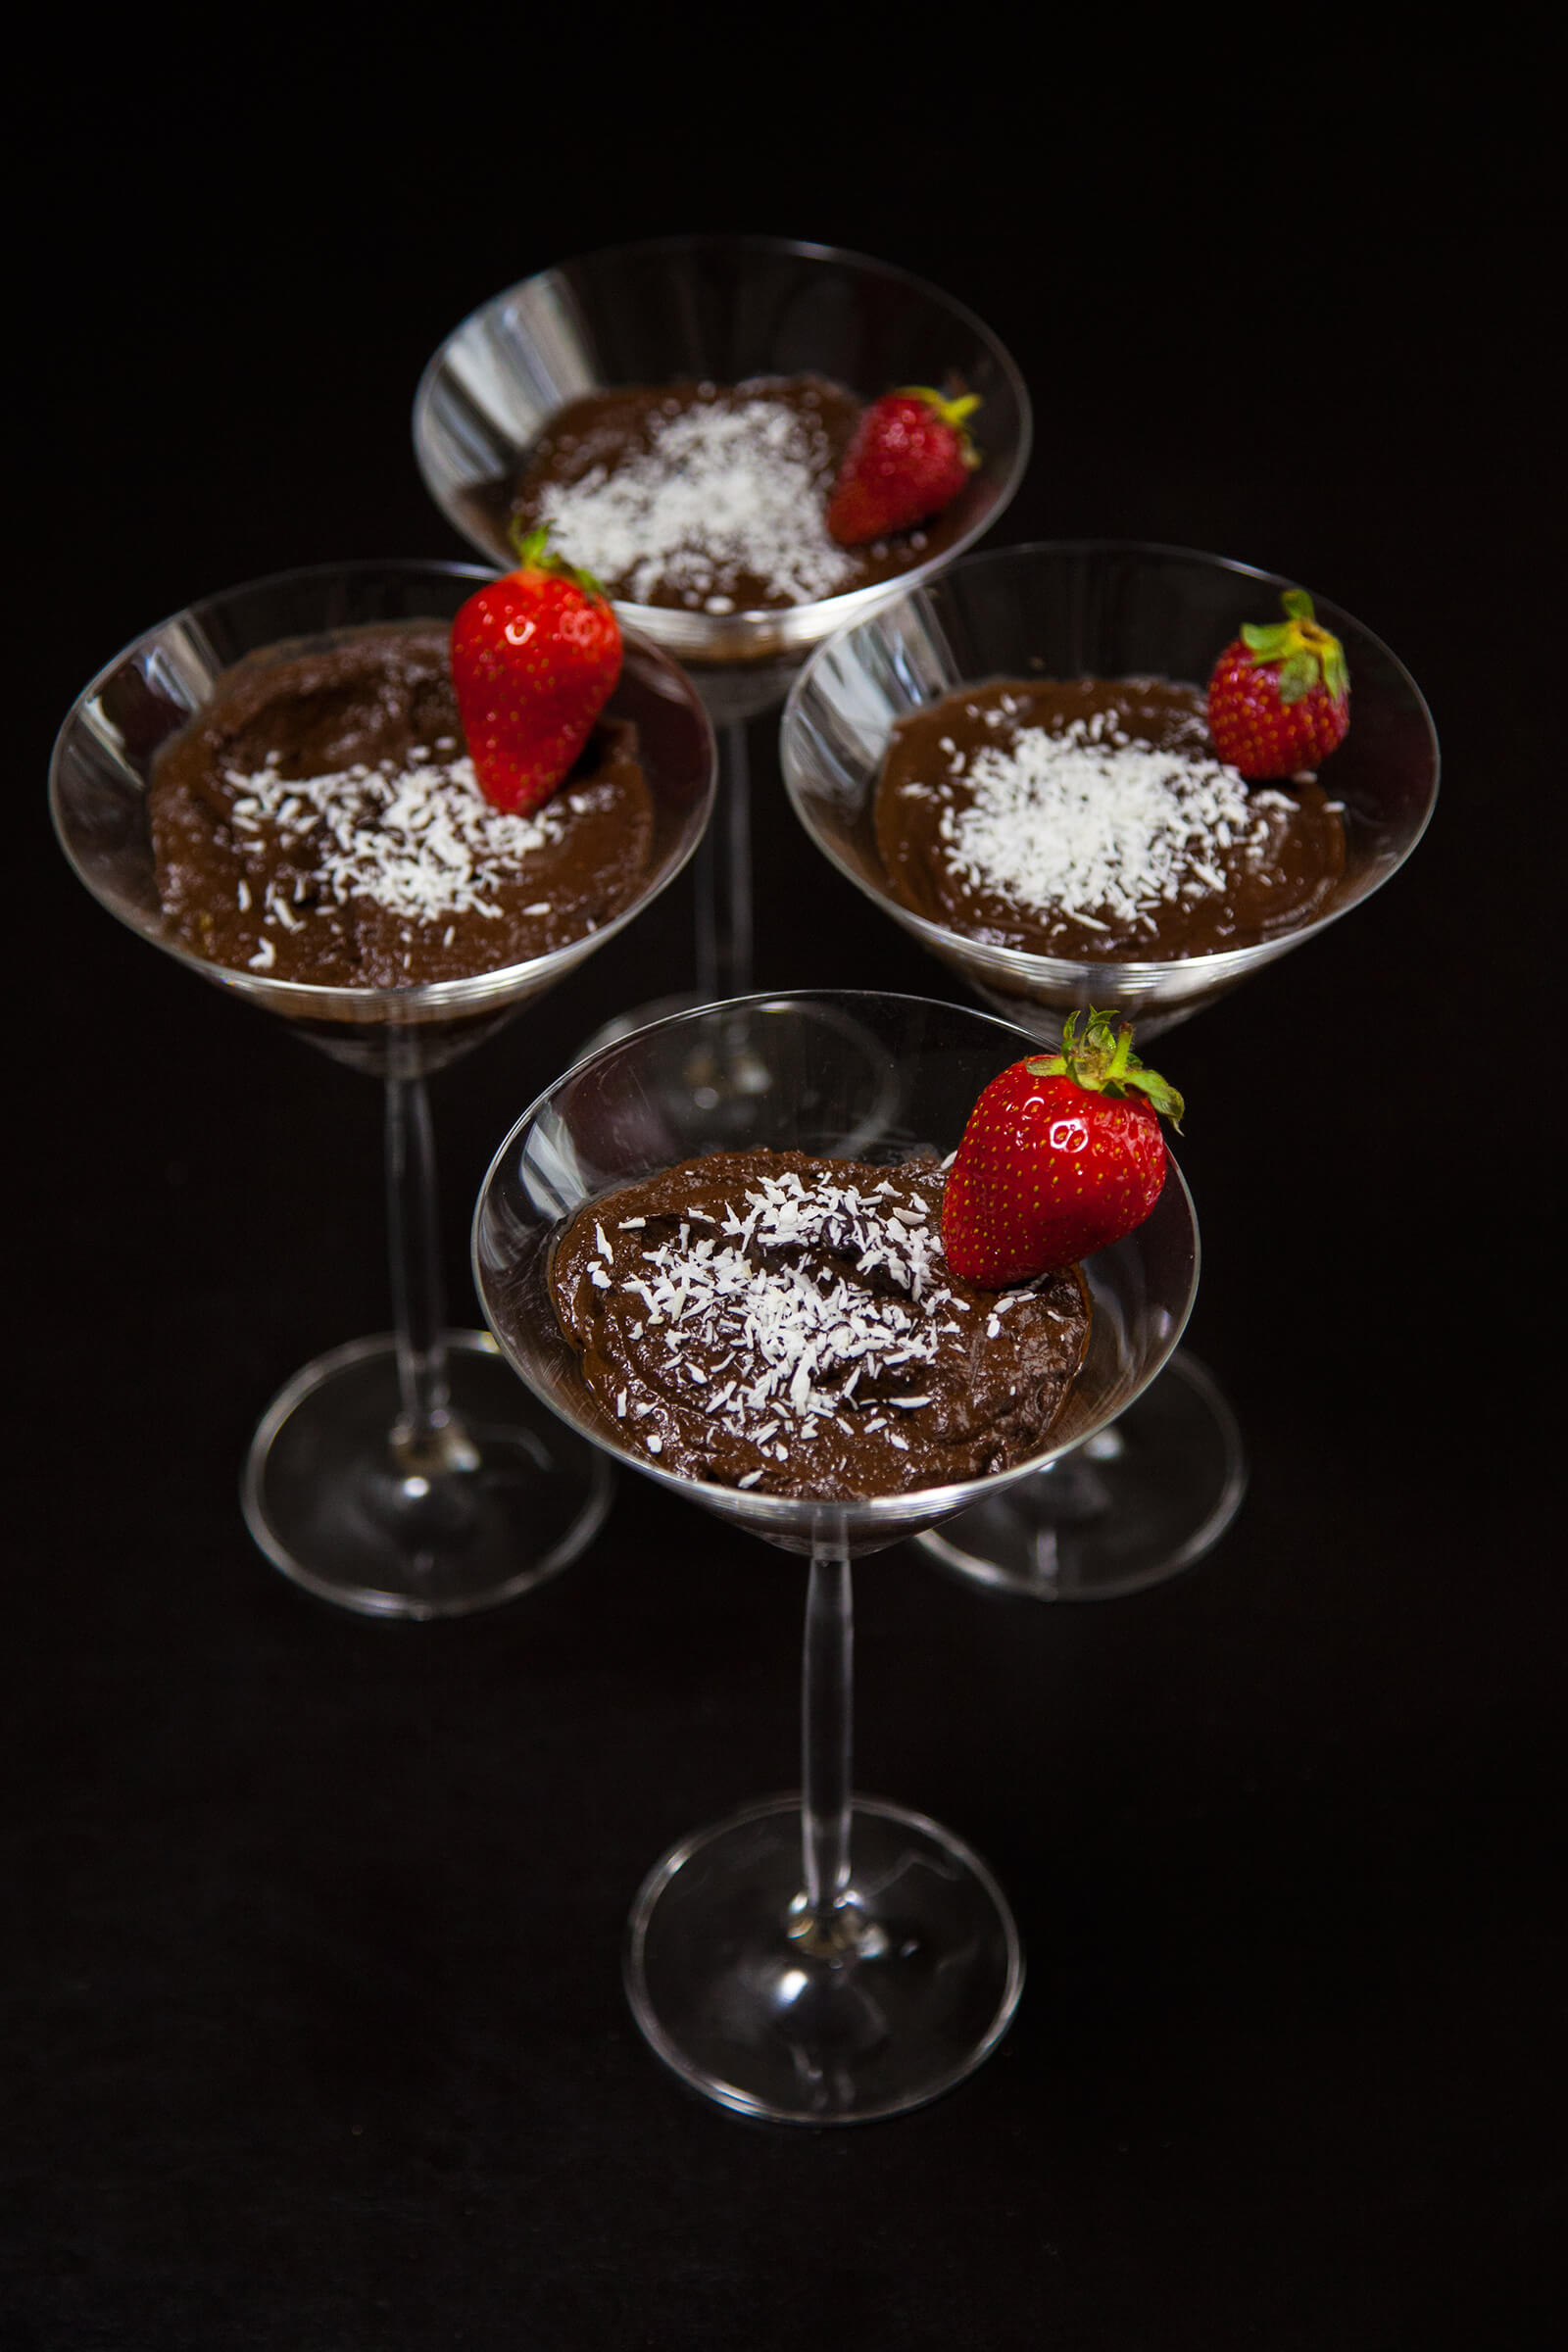 Four servings of healthy chocolate mousse in martini glasses